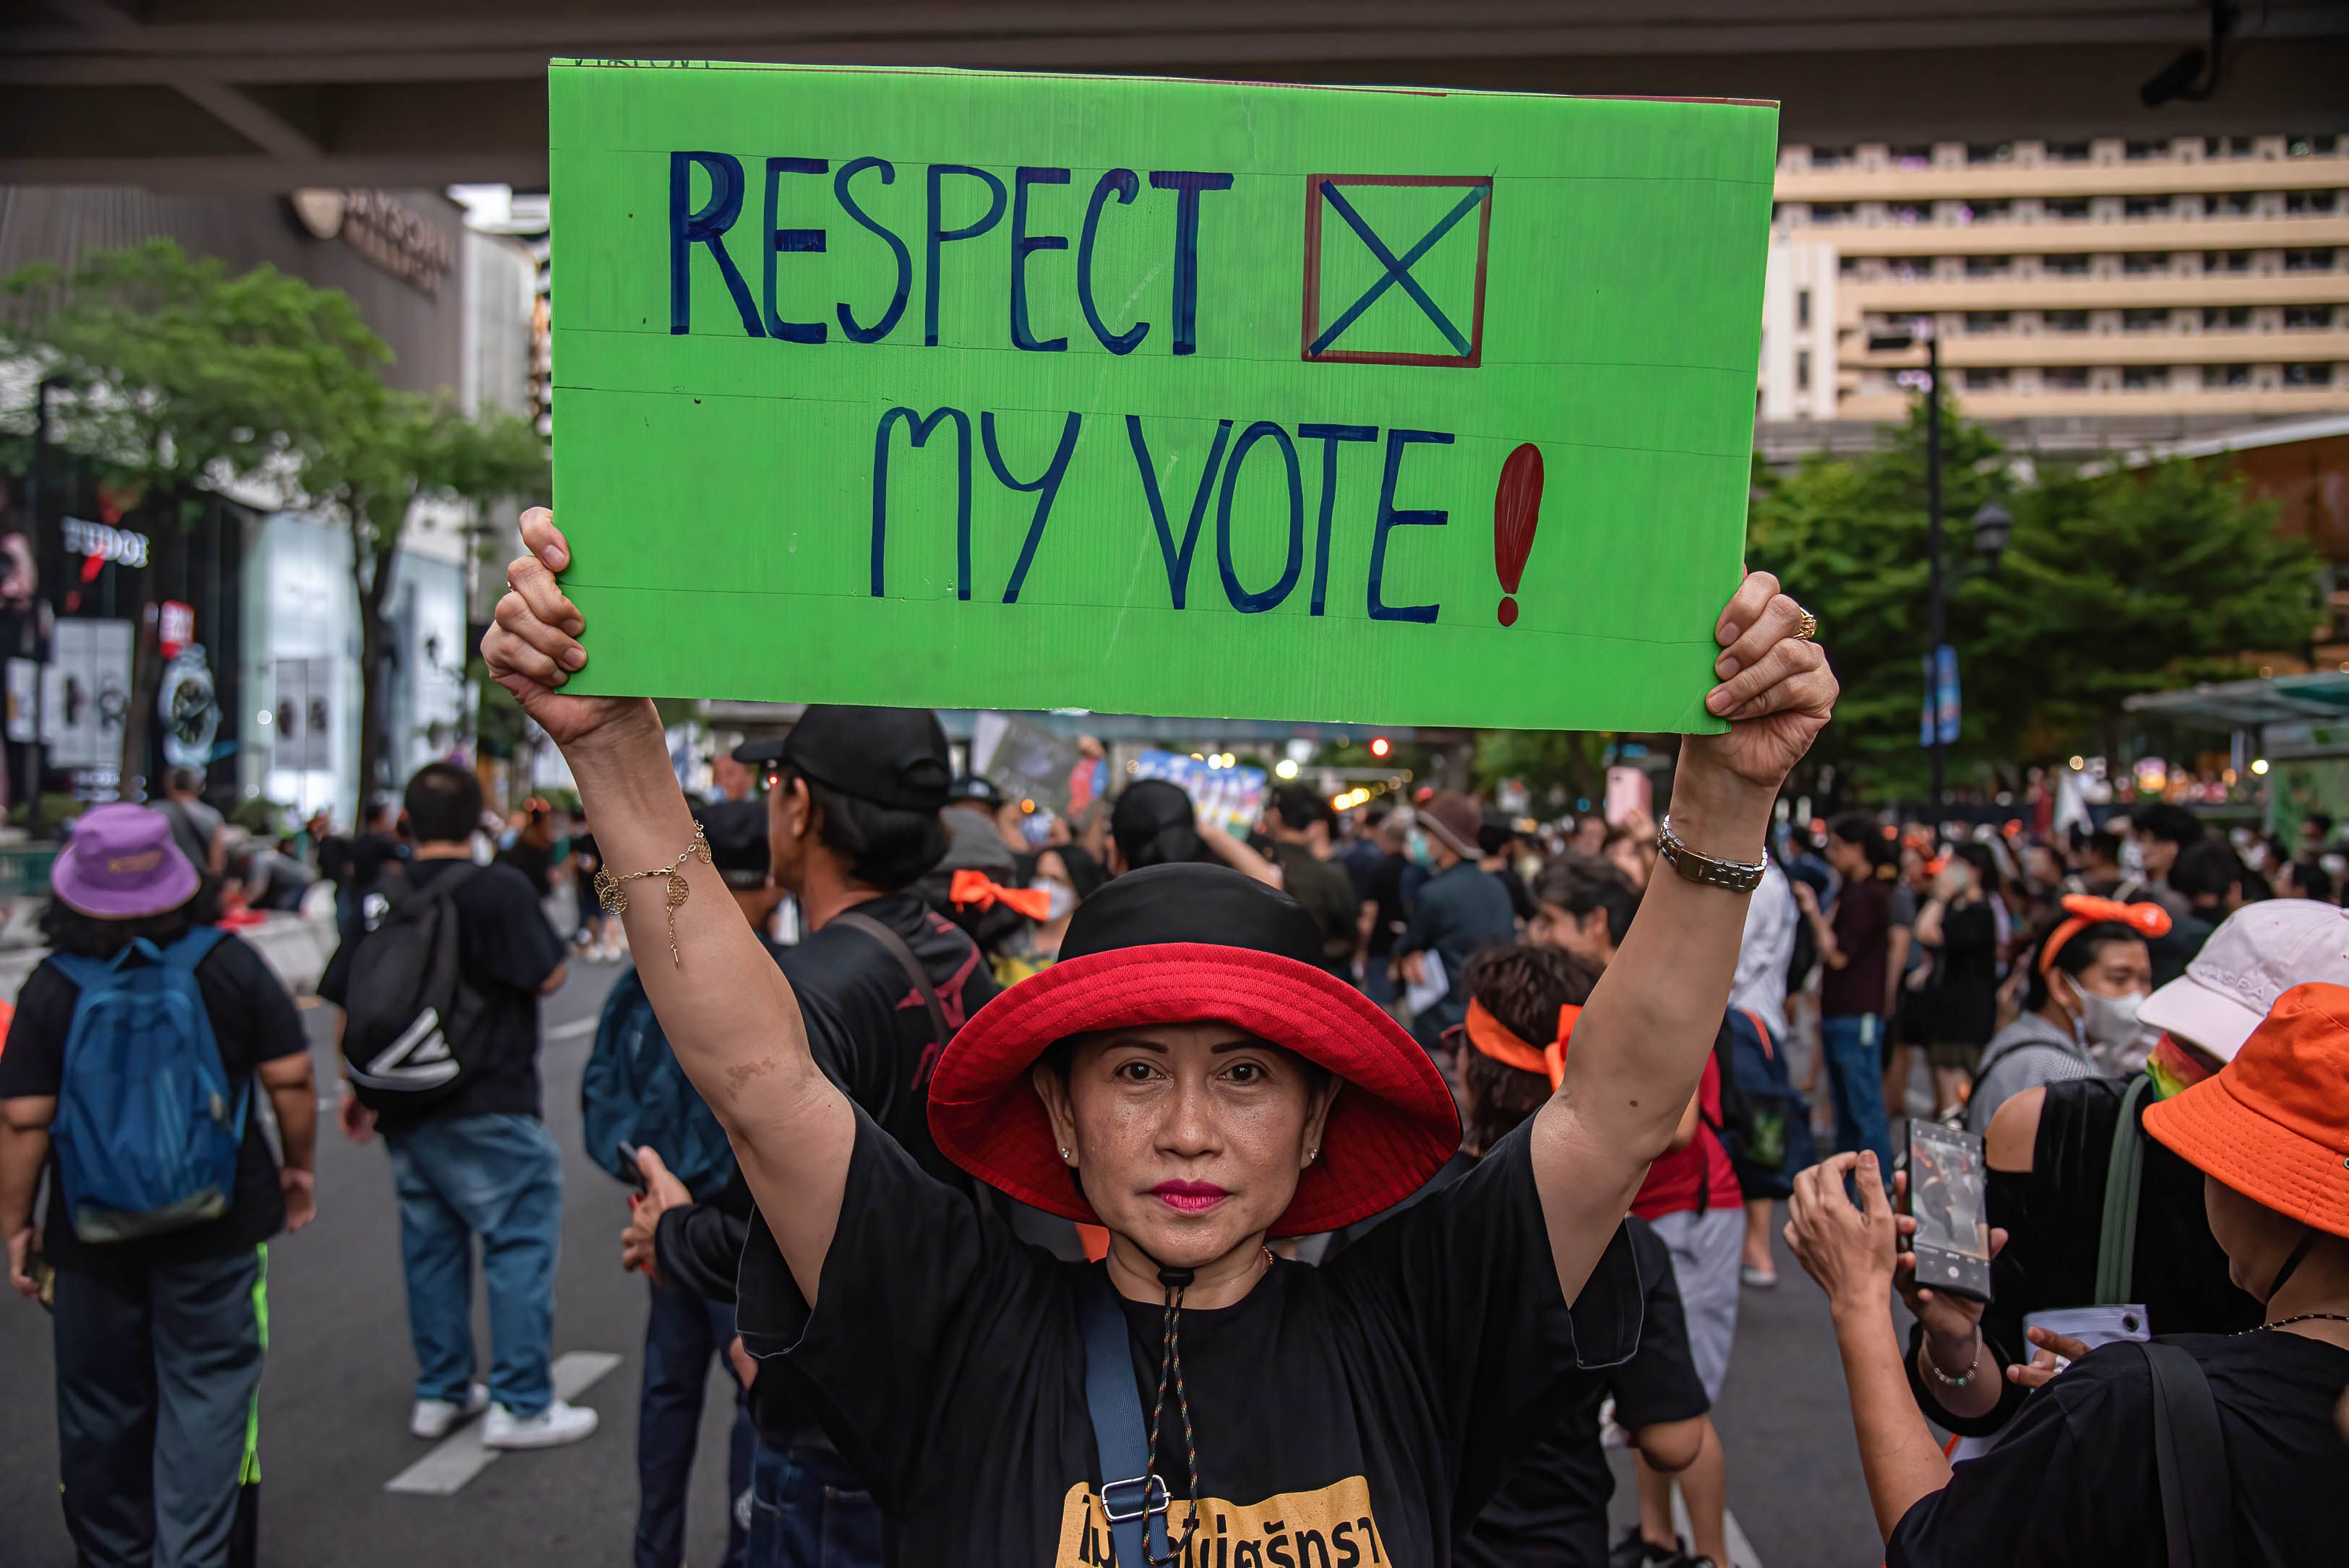 A protester holds up a placard during a pro-democracy demonstration calling the senators to respect the result of the May 14 general election in Bangkok and support Pita Limjaroenrat, the prime minister candidate from the Move Forward party who won the election. Photo: dpa